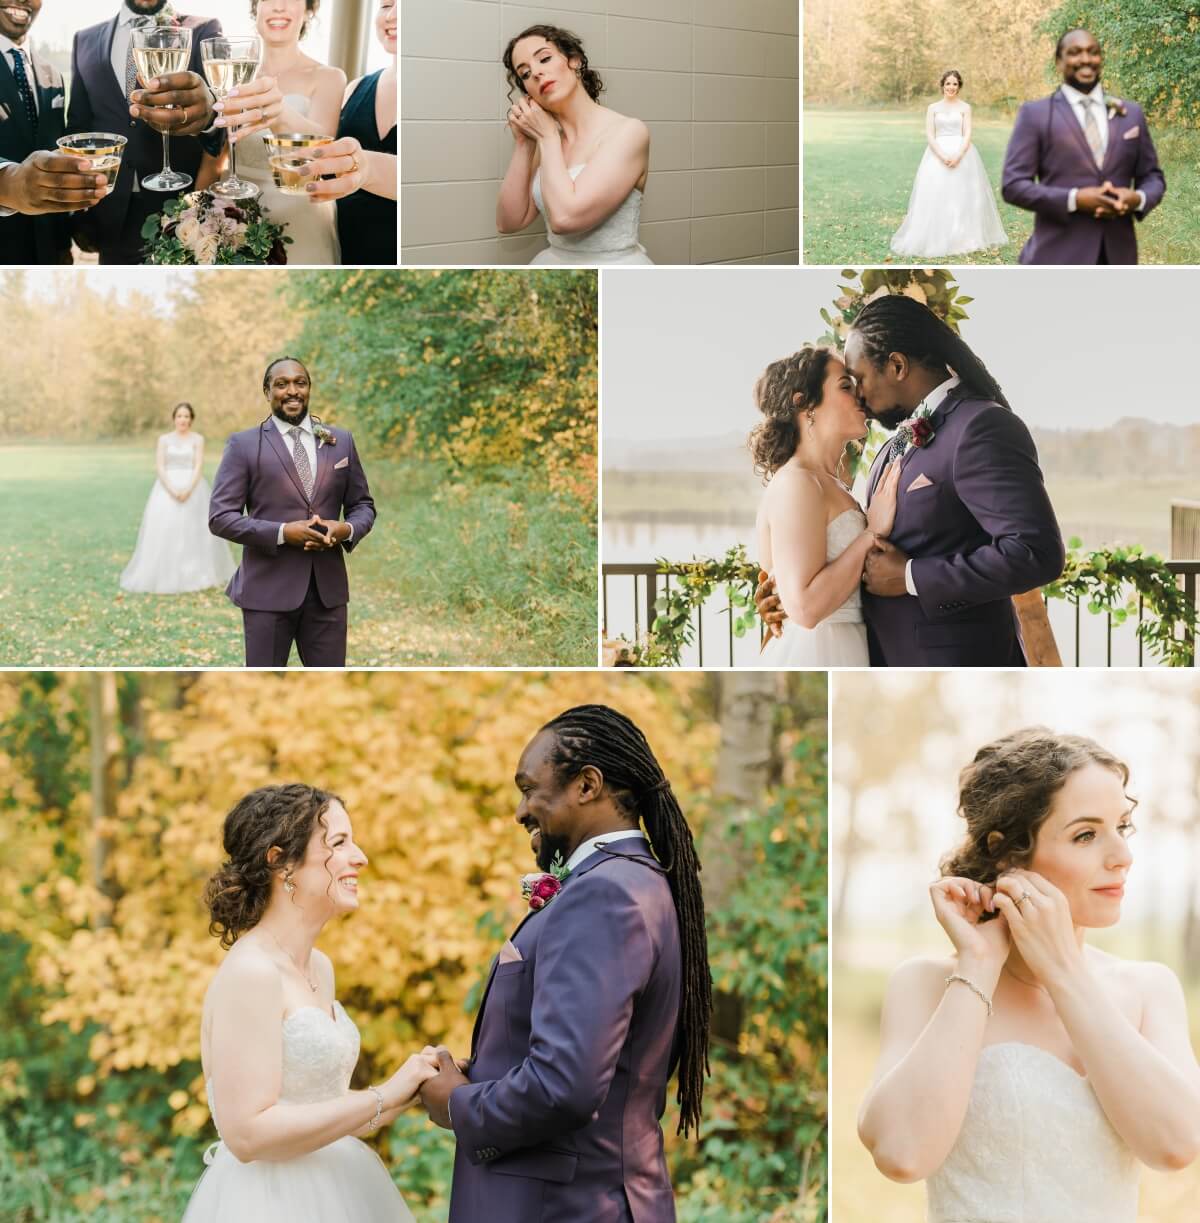 A collage of images of an Albertan elopement at West River's Edge